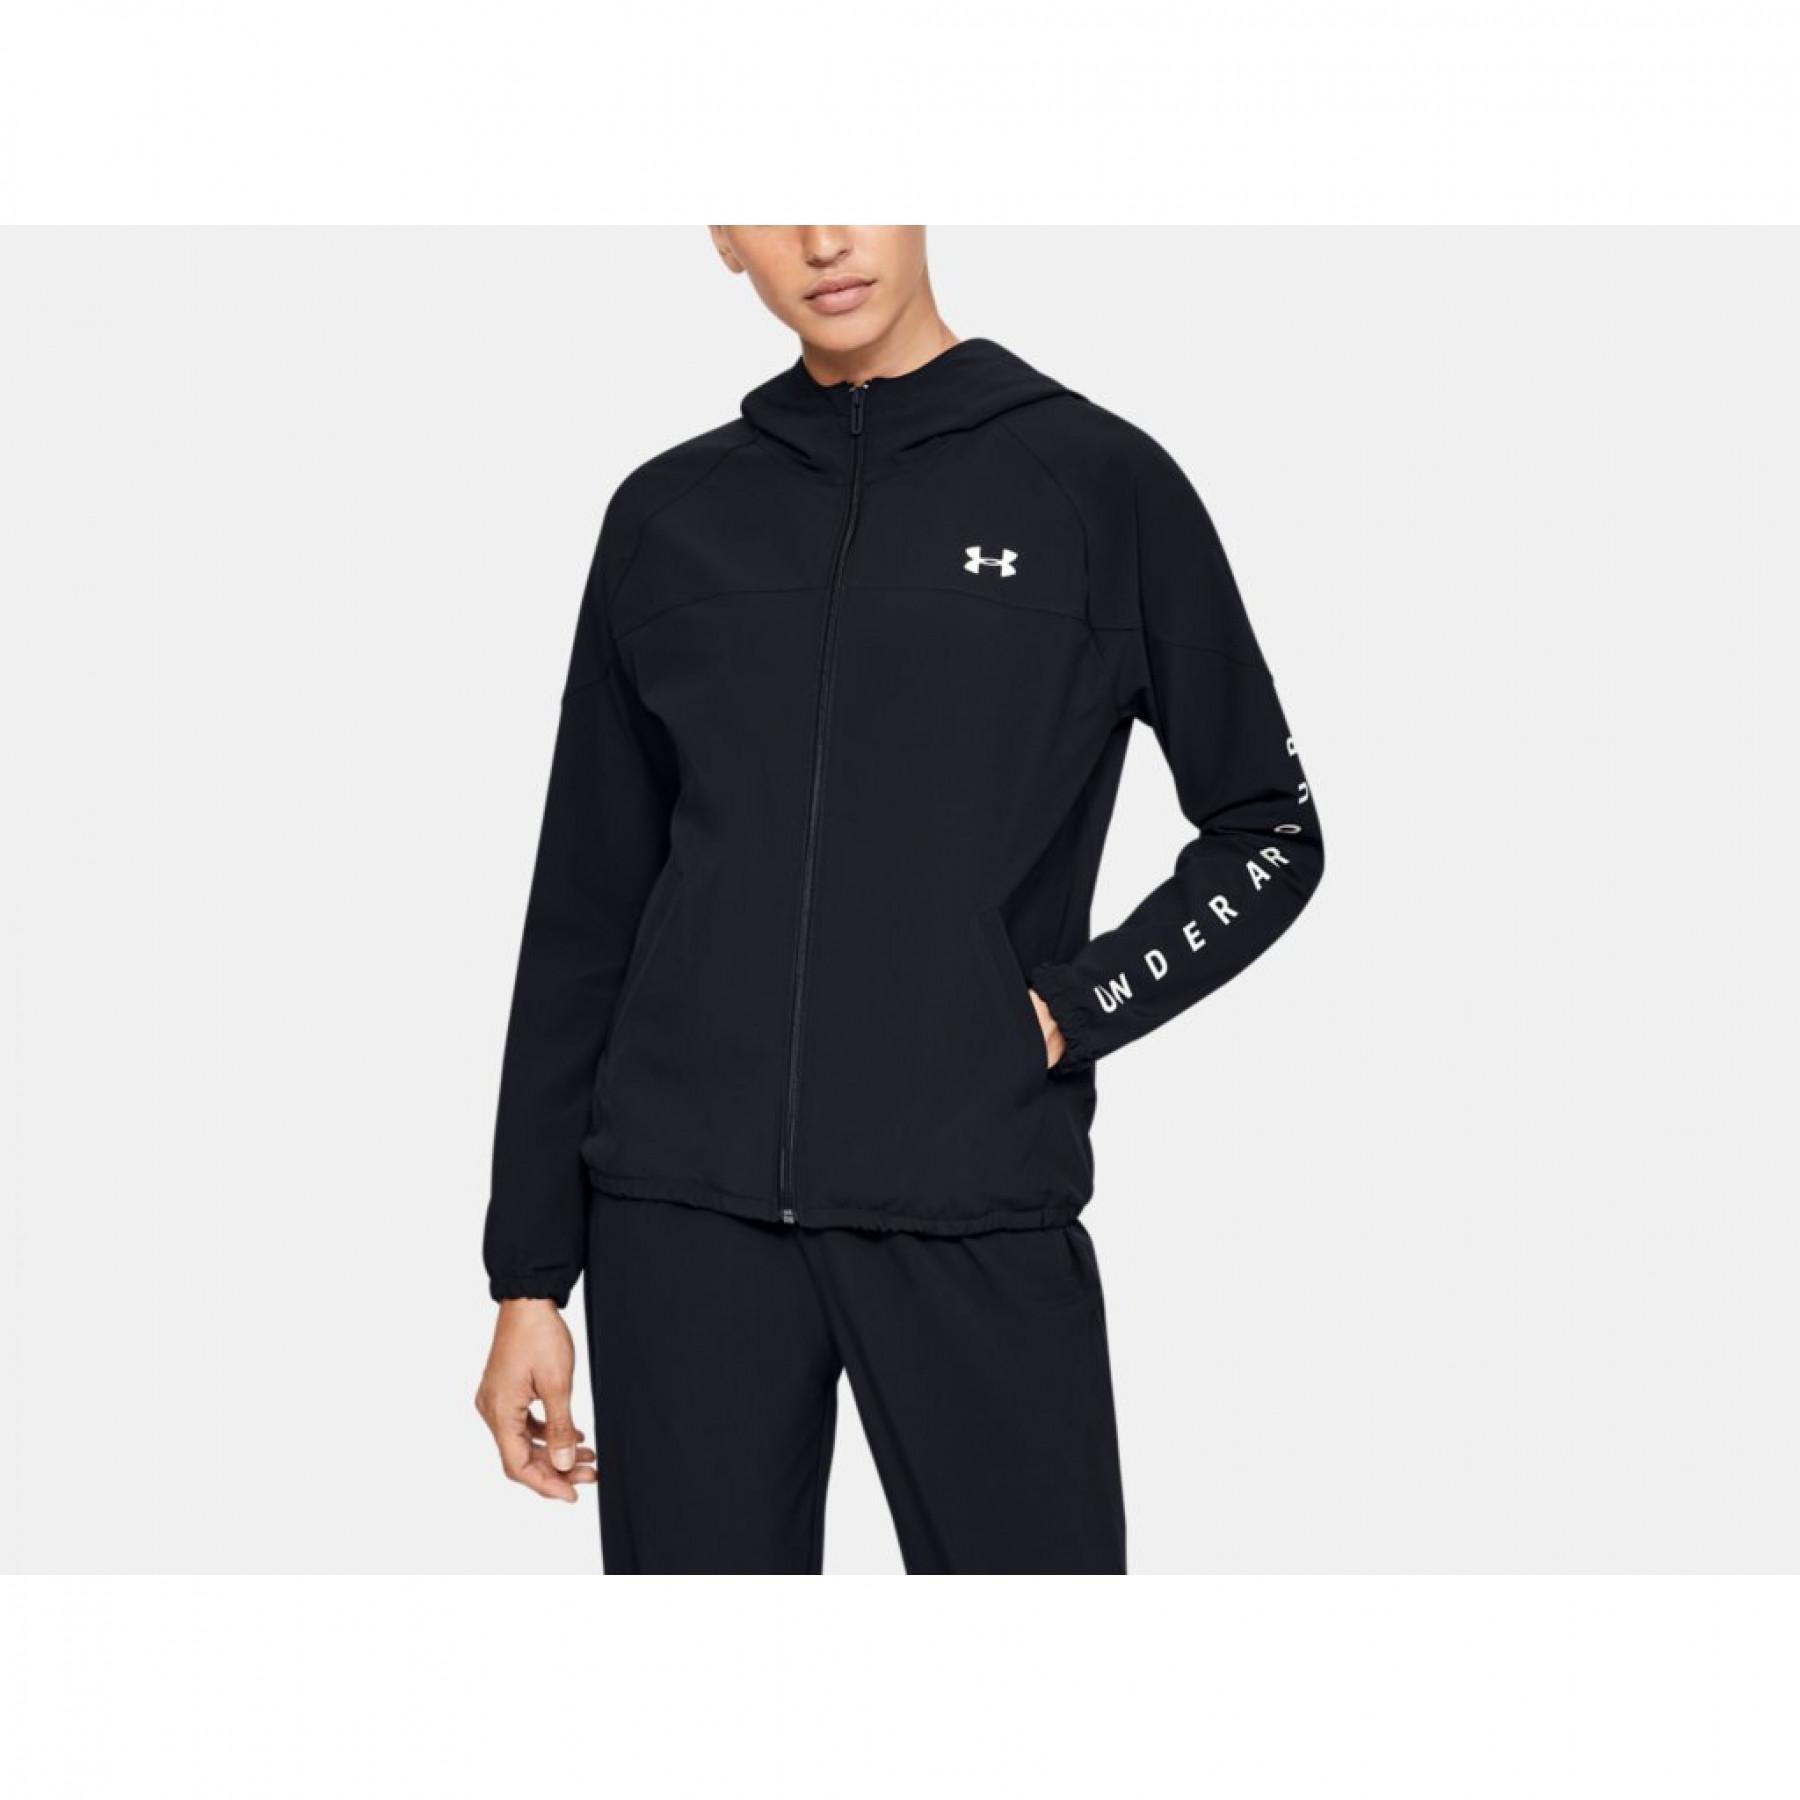 Sudadera con capucha para mujer Under Armour Woven Branded Full Zip